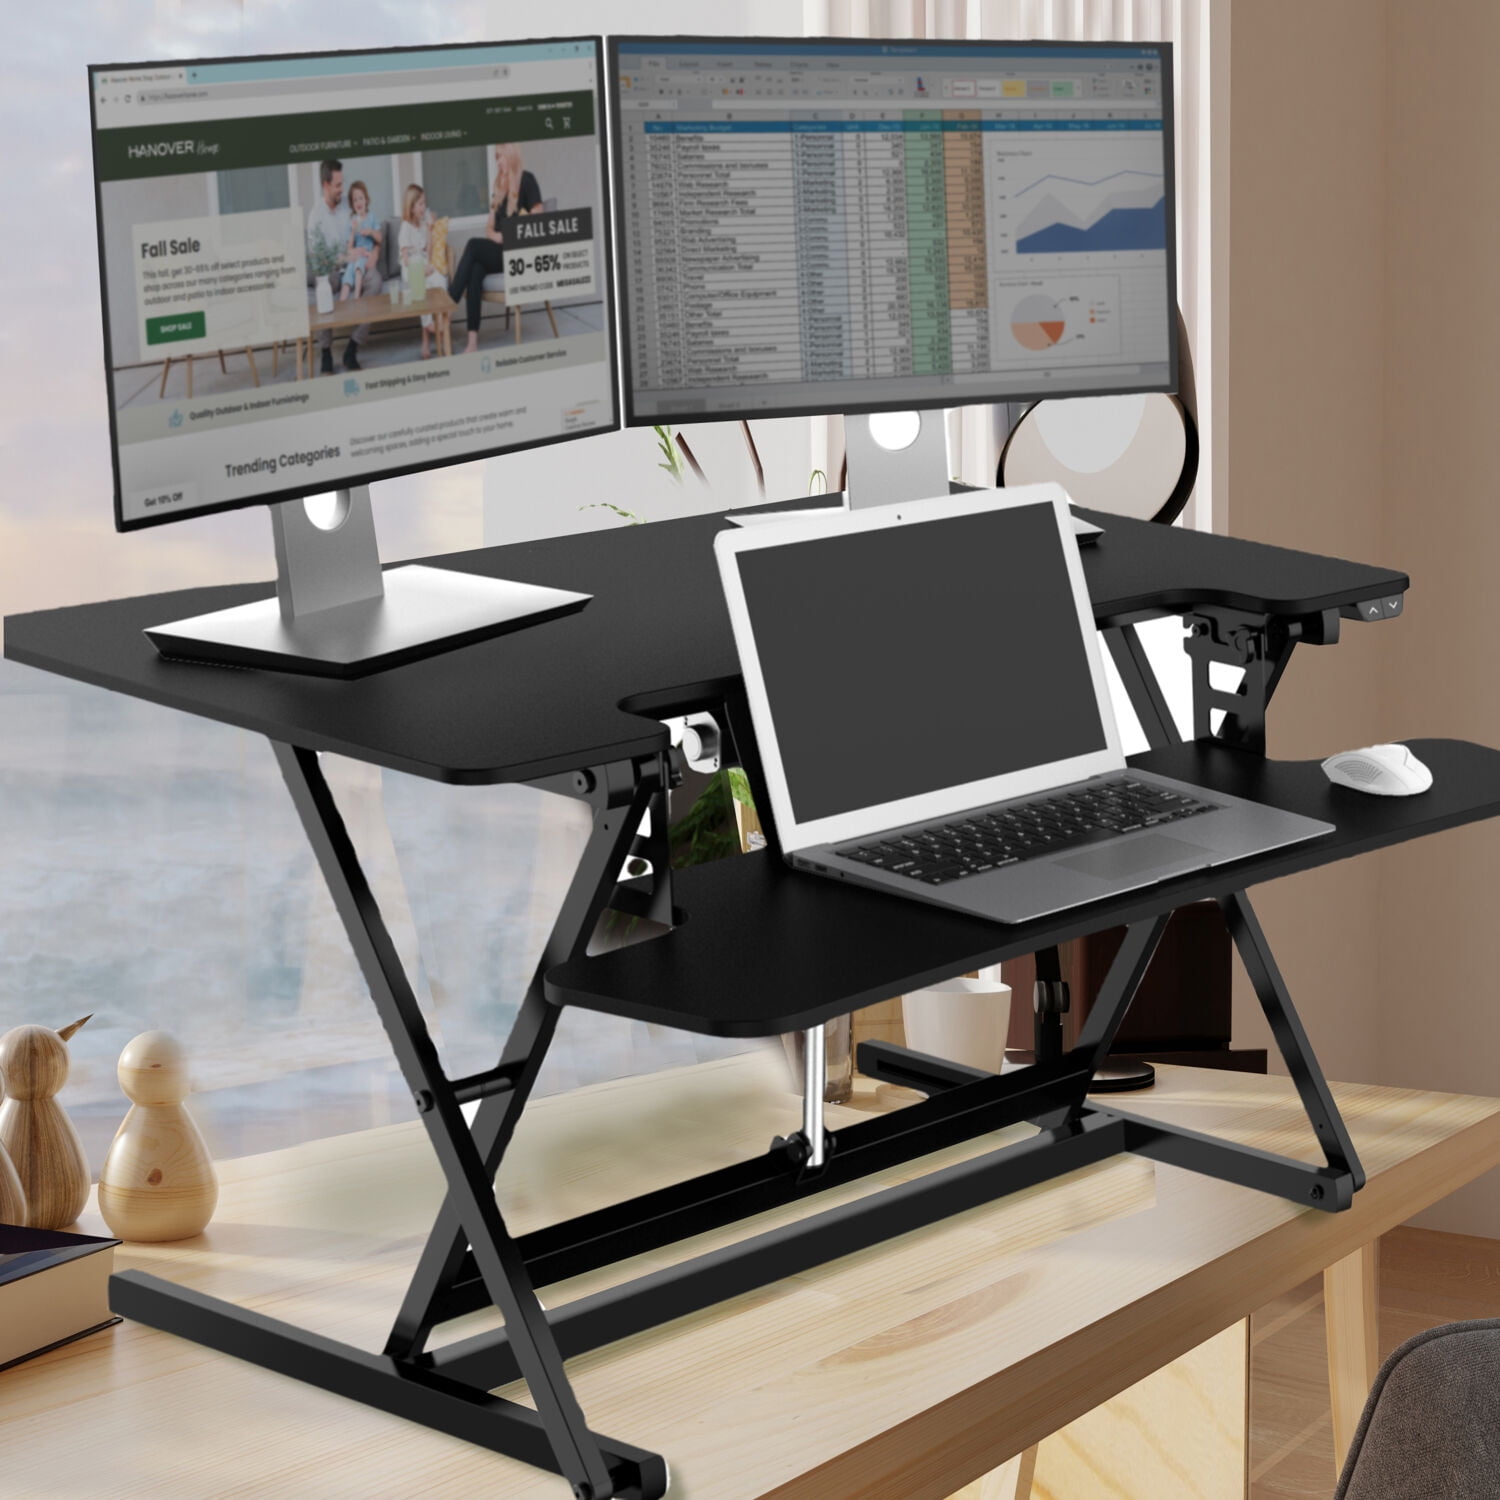 New! A3 Table Top Stand, Black Counter Top Display